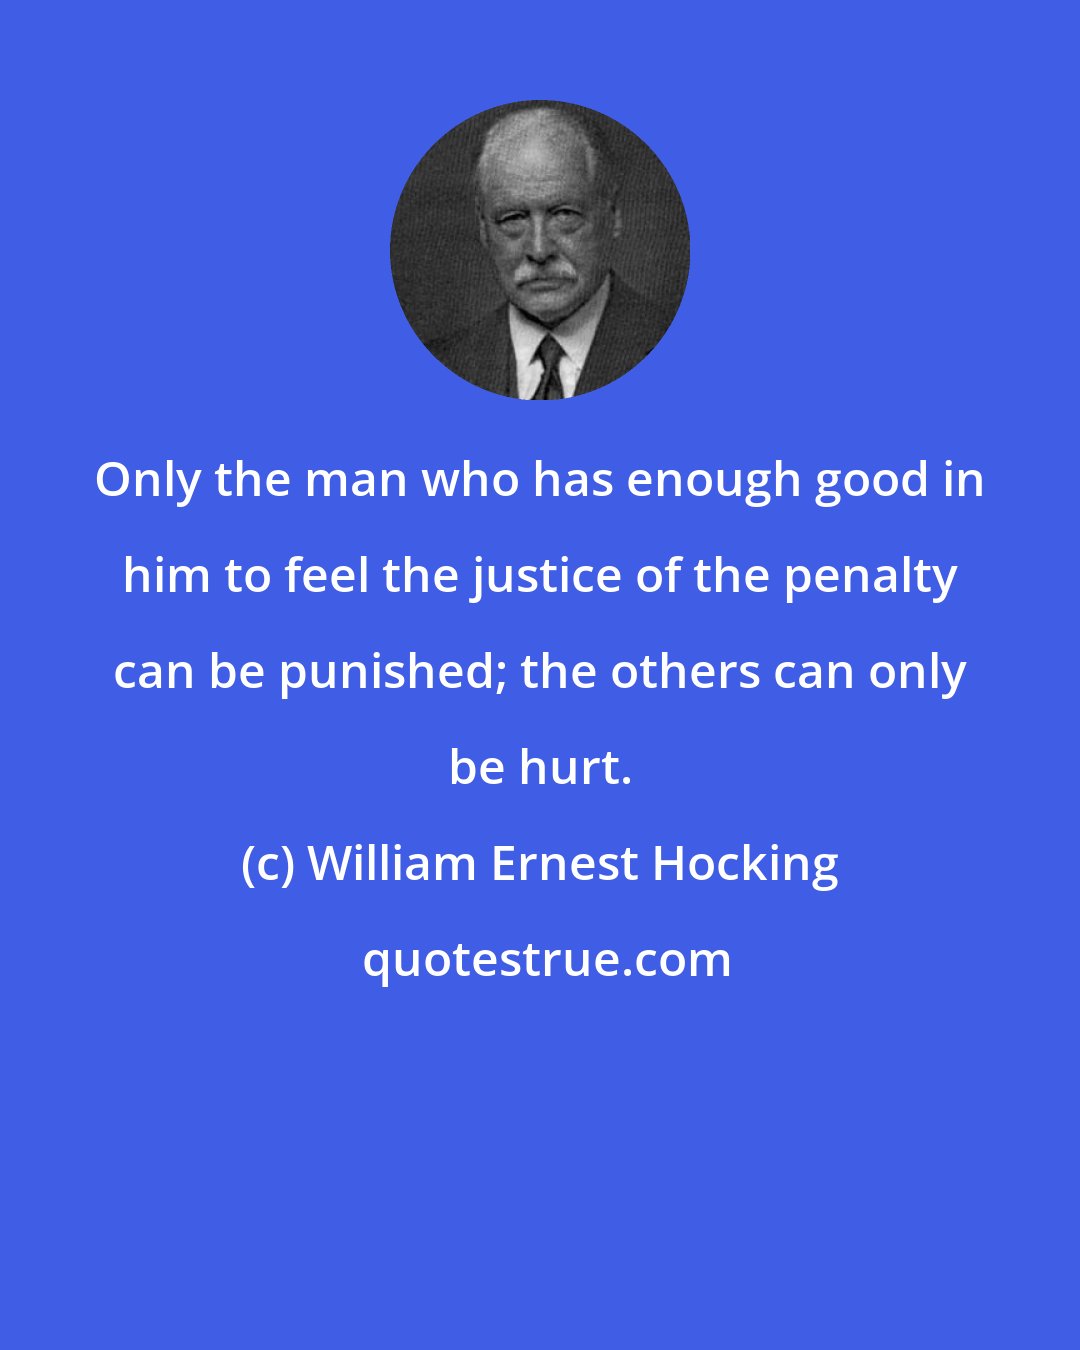 William Ernest Hocking: Only the man who has enough good in him to feel the justice of the penalty can be punished; the others can only be hurt.